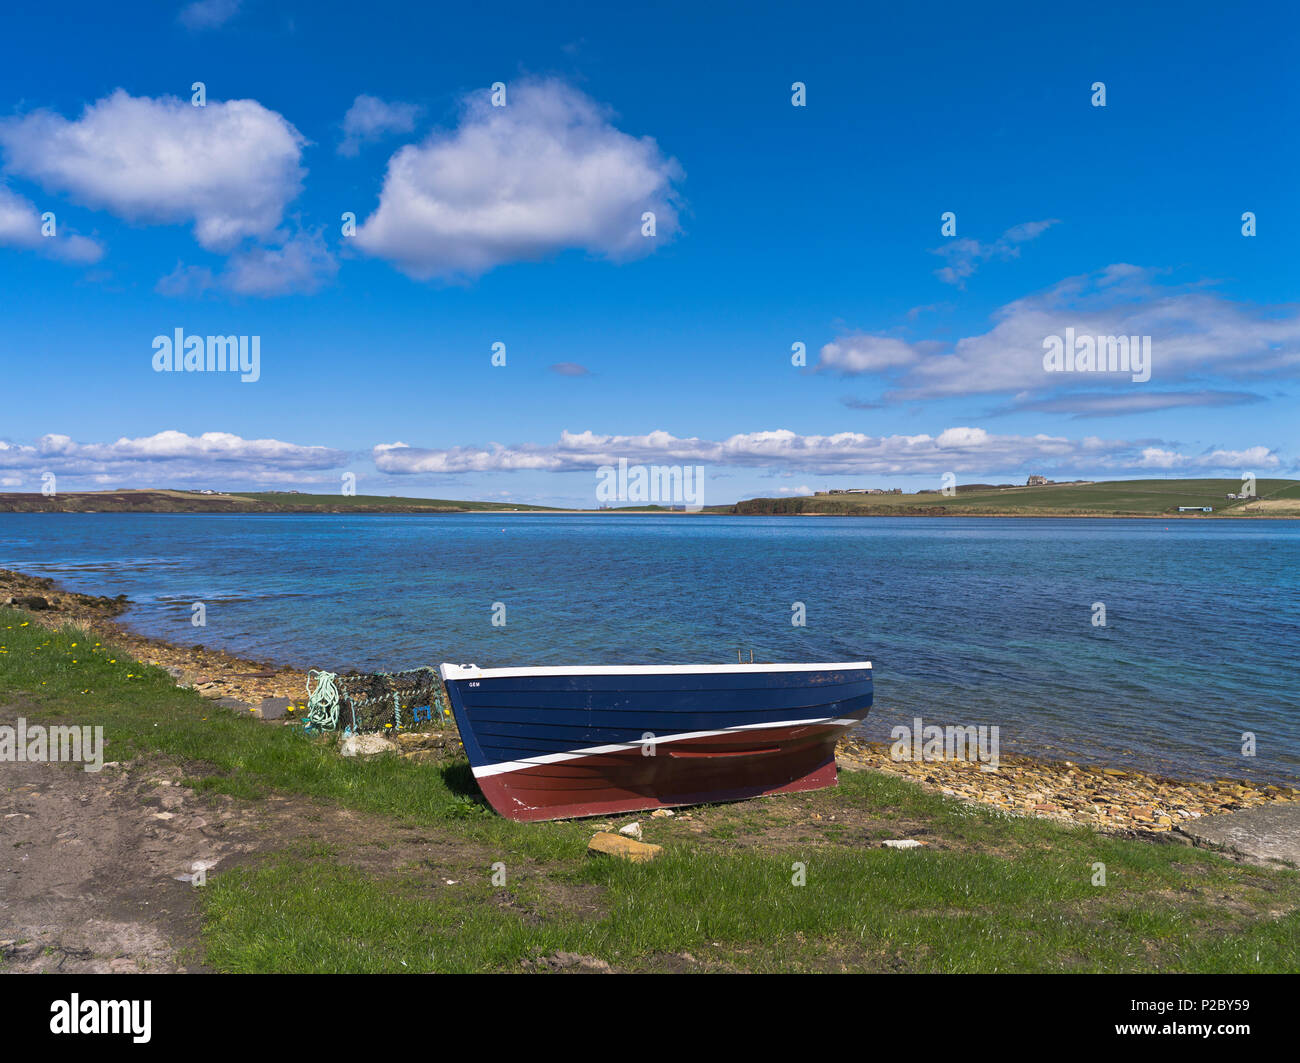 dh Widewall bay HERSTON ORKNEY Boat beached along shore line coast south ronaldsay scotland isles Stock Photo